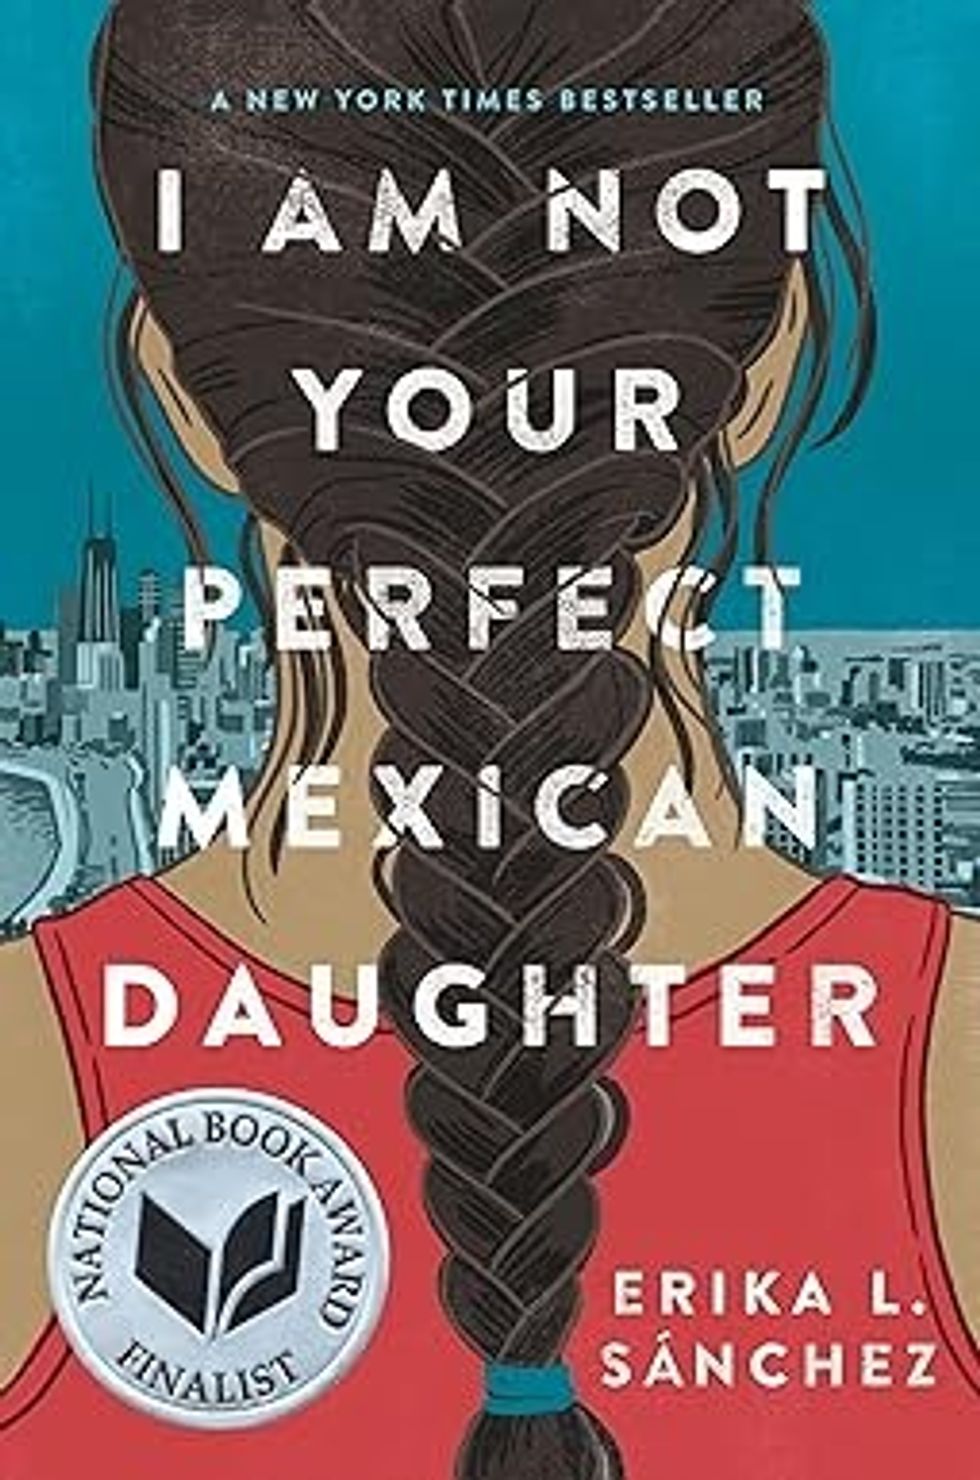 I am Not Your Perfect Mexican Daughter by Erika L. Sanchez